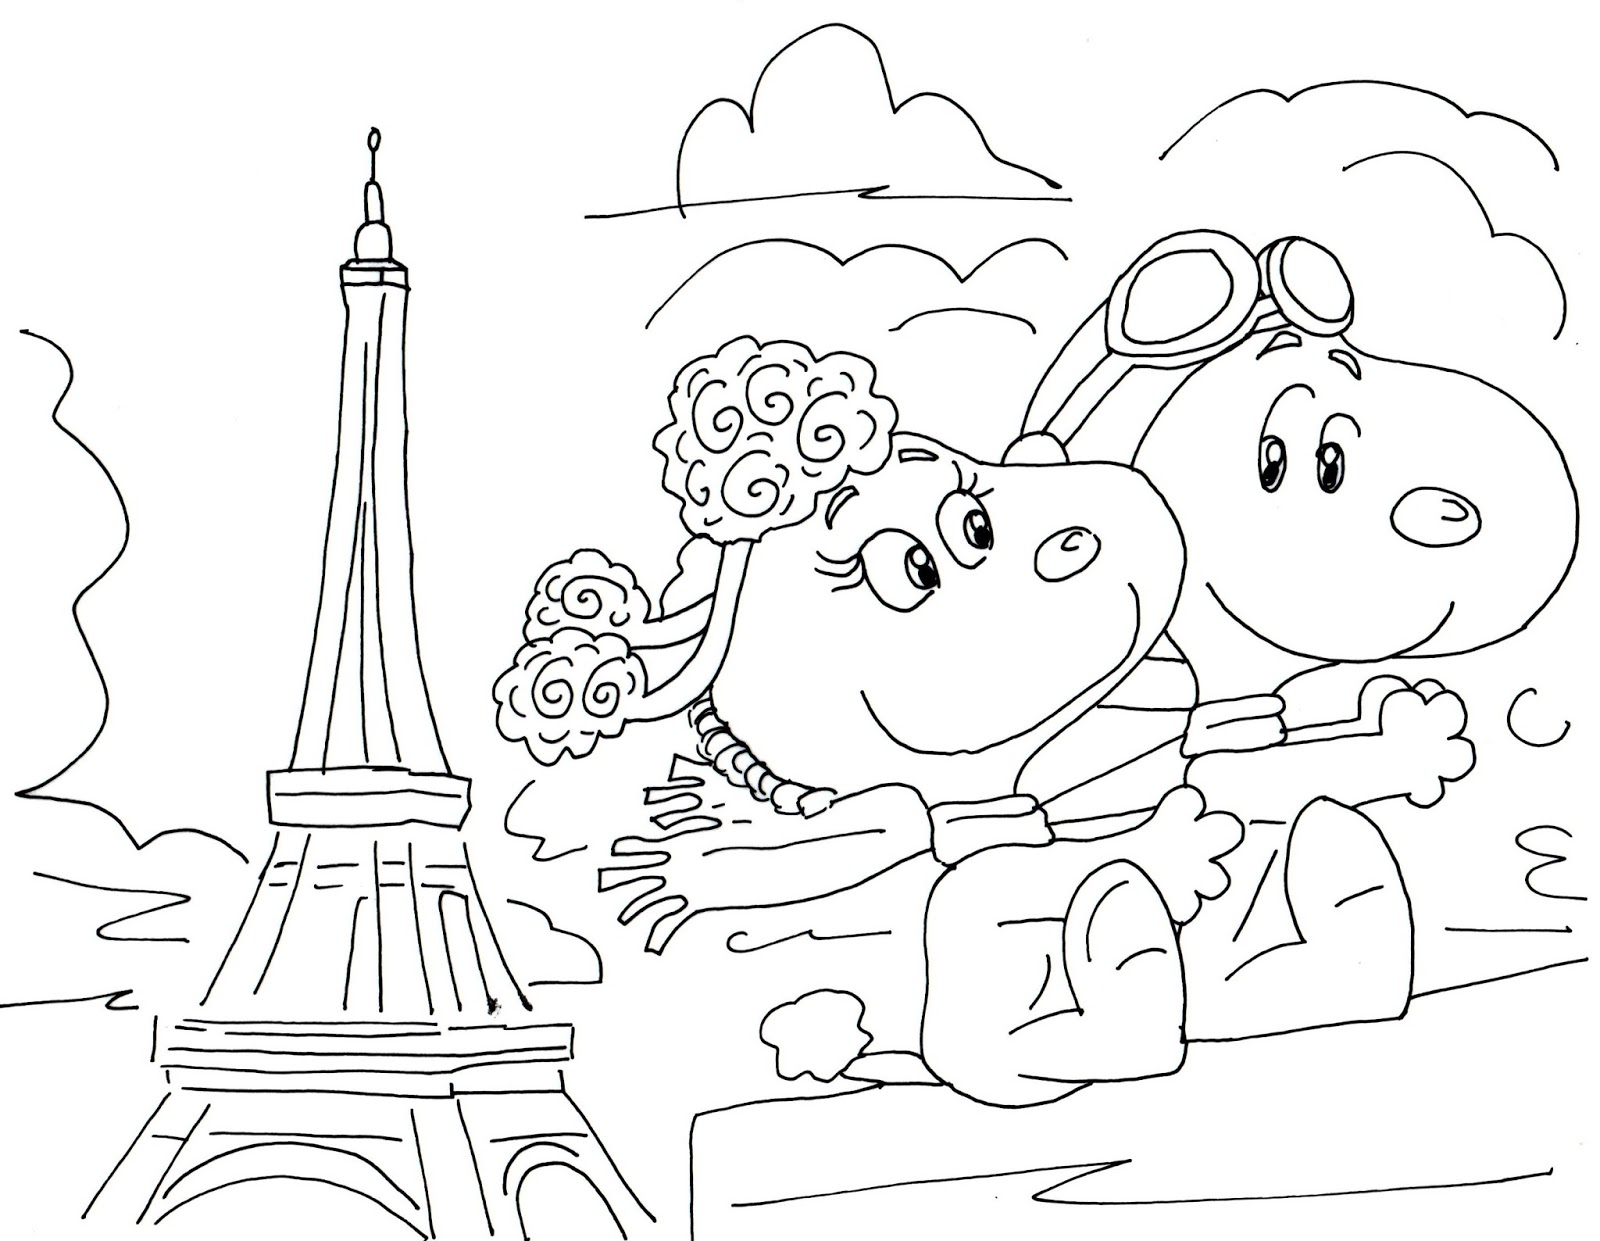 Snoopy And Woodstock Coloring Pages Peanuts Coloring Pages Best Free Coloring Pages Site